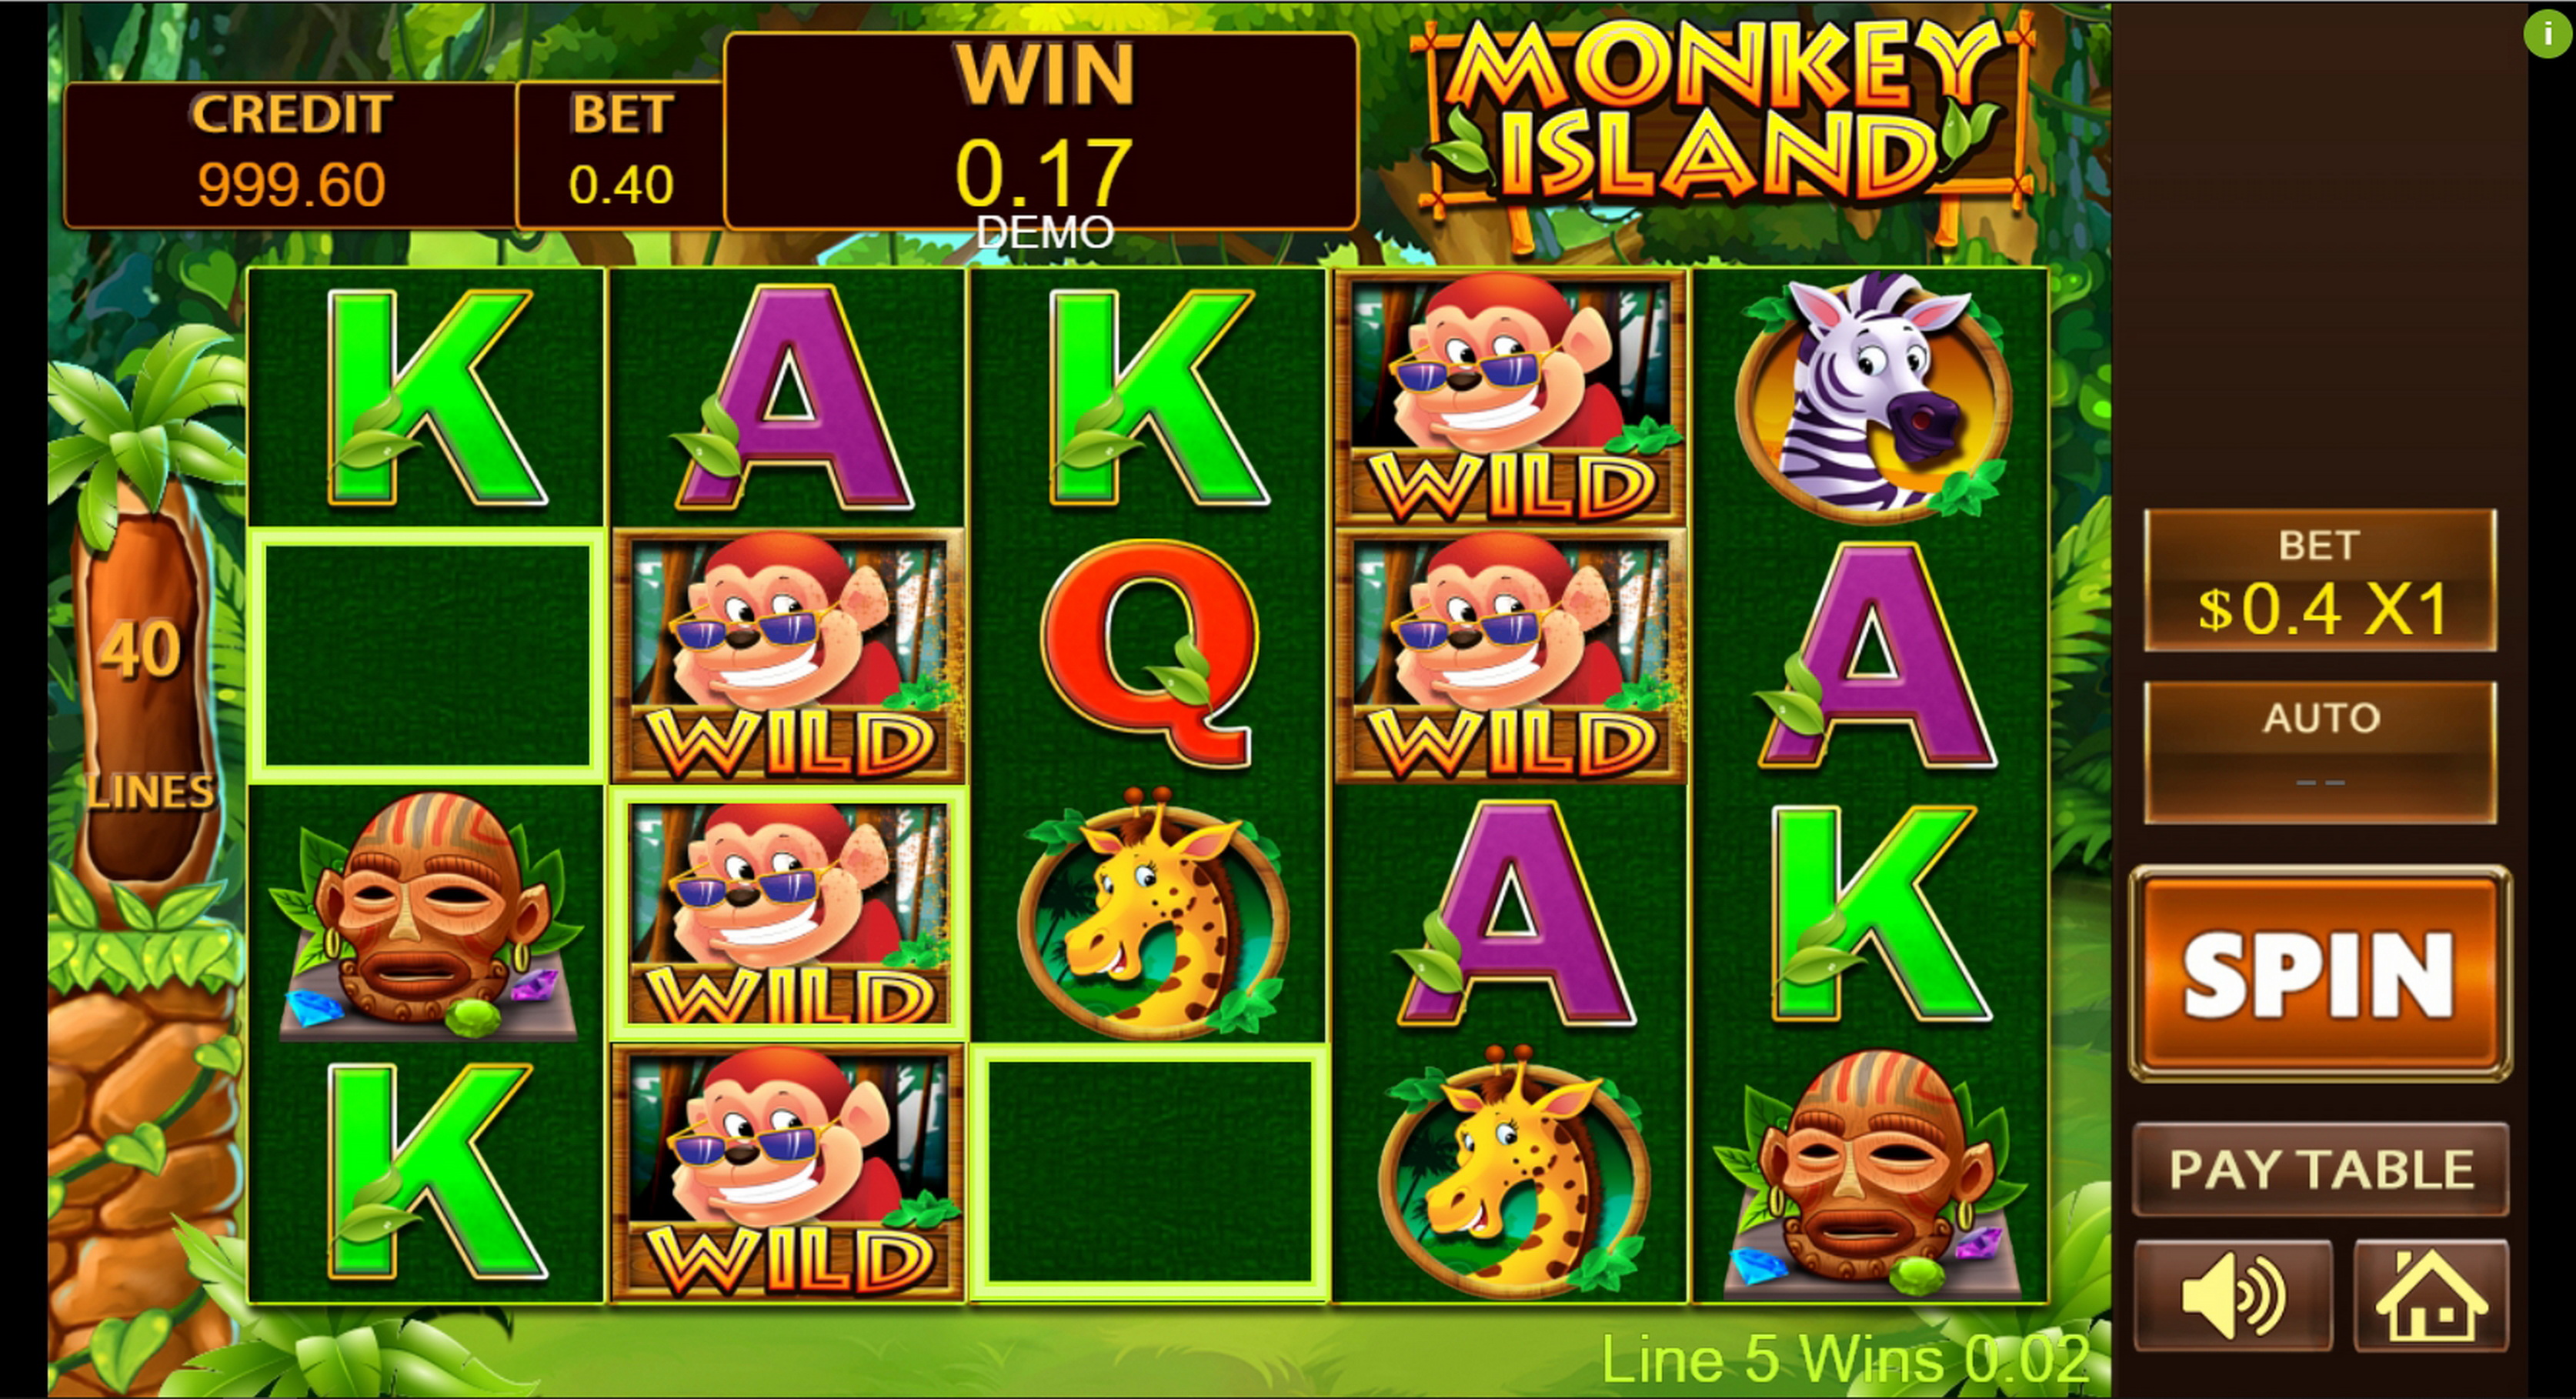 Win Money in Monkey Island Free Slot Game by PlayStar